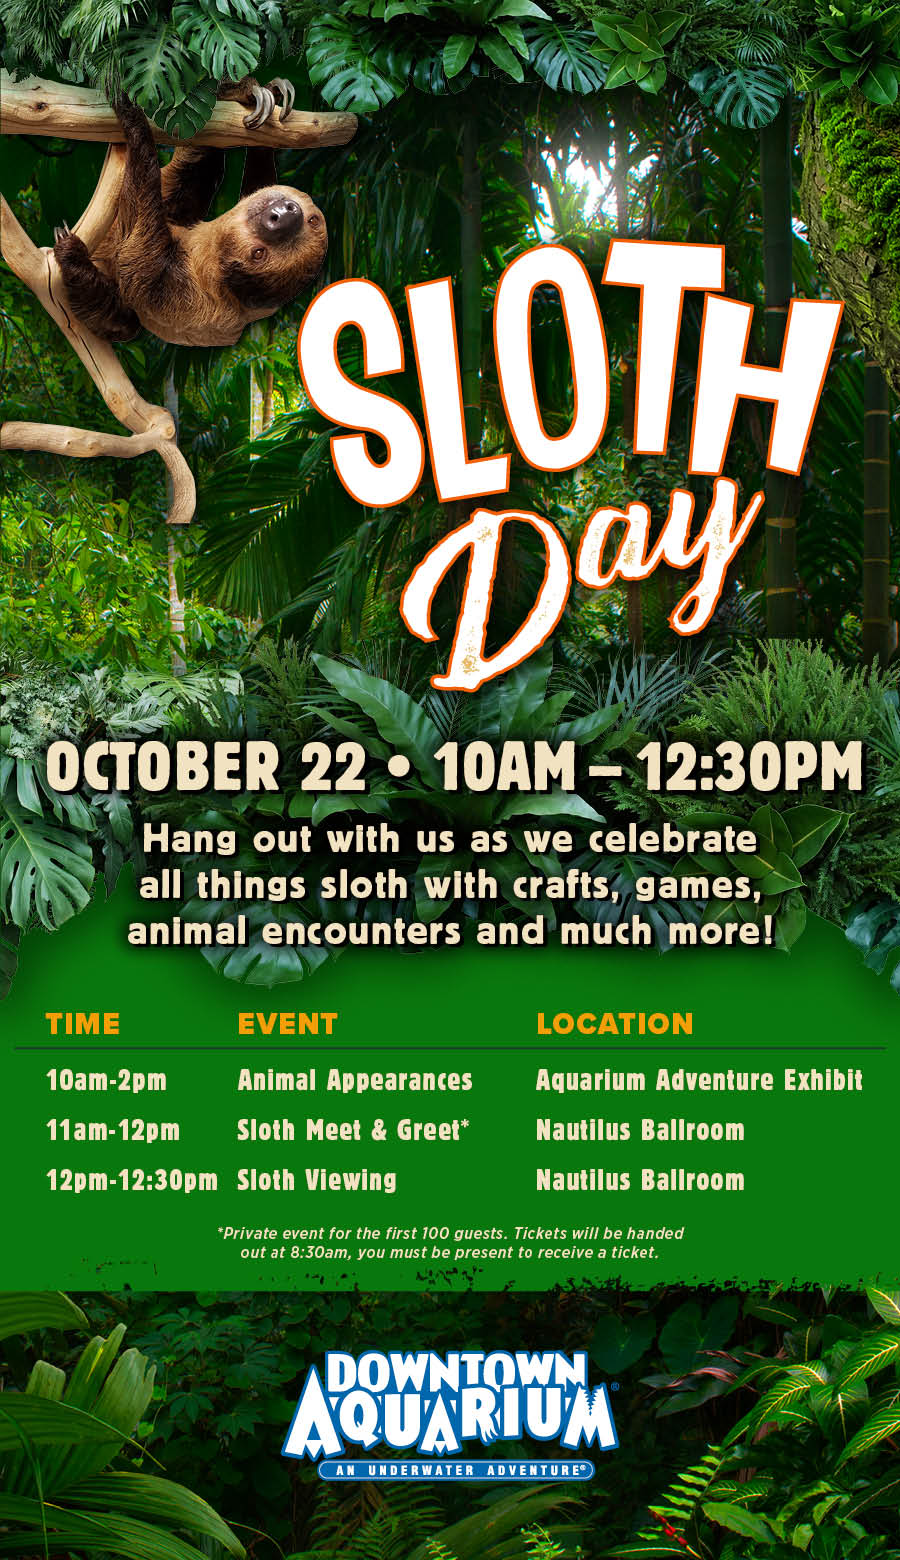 Sloth weekend February 20th and 21st 10am - 2pm.